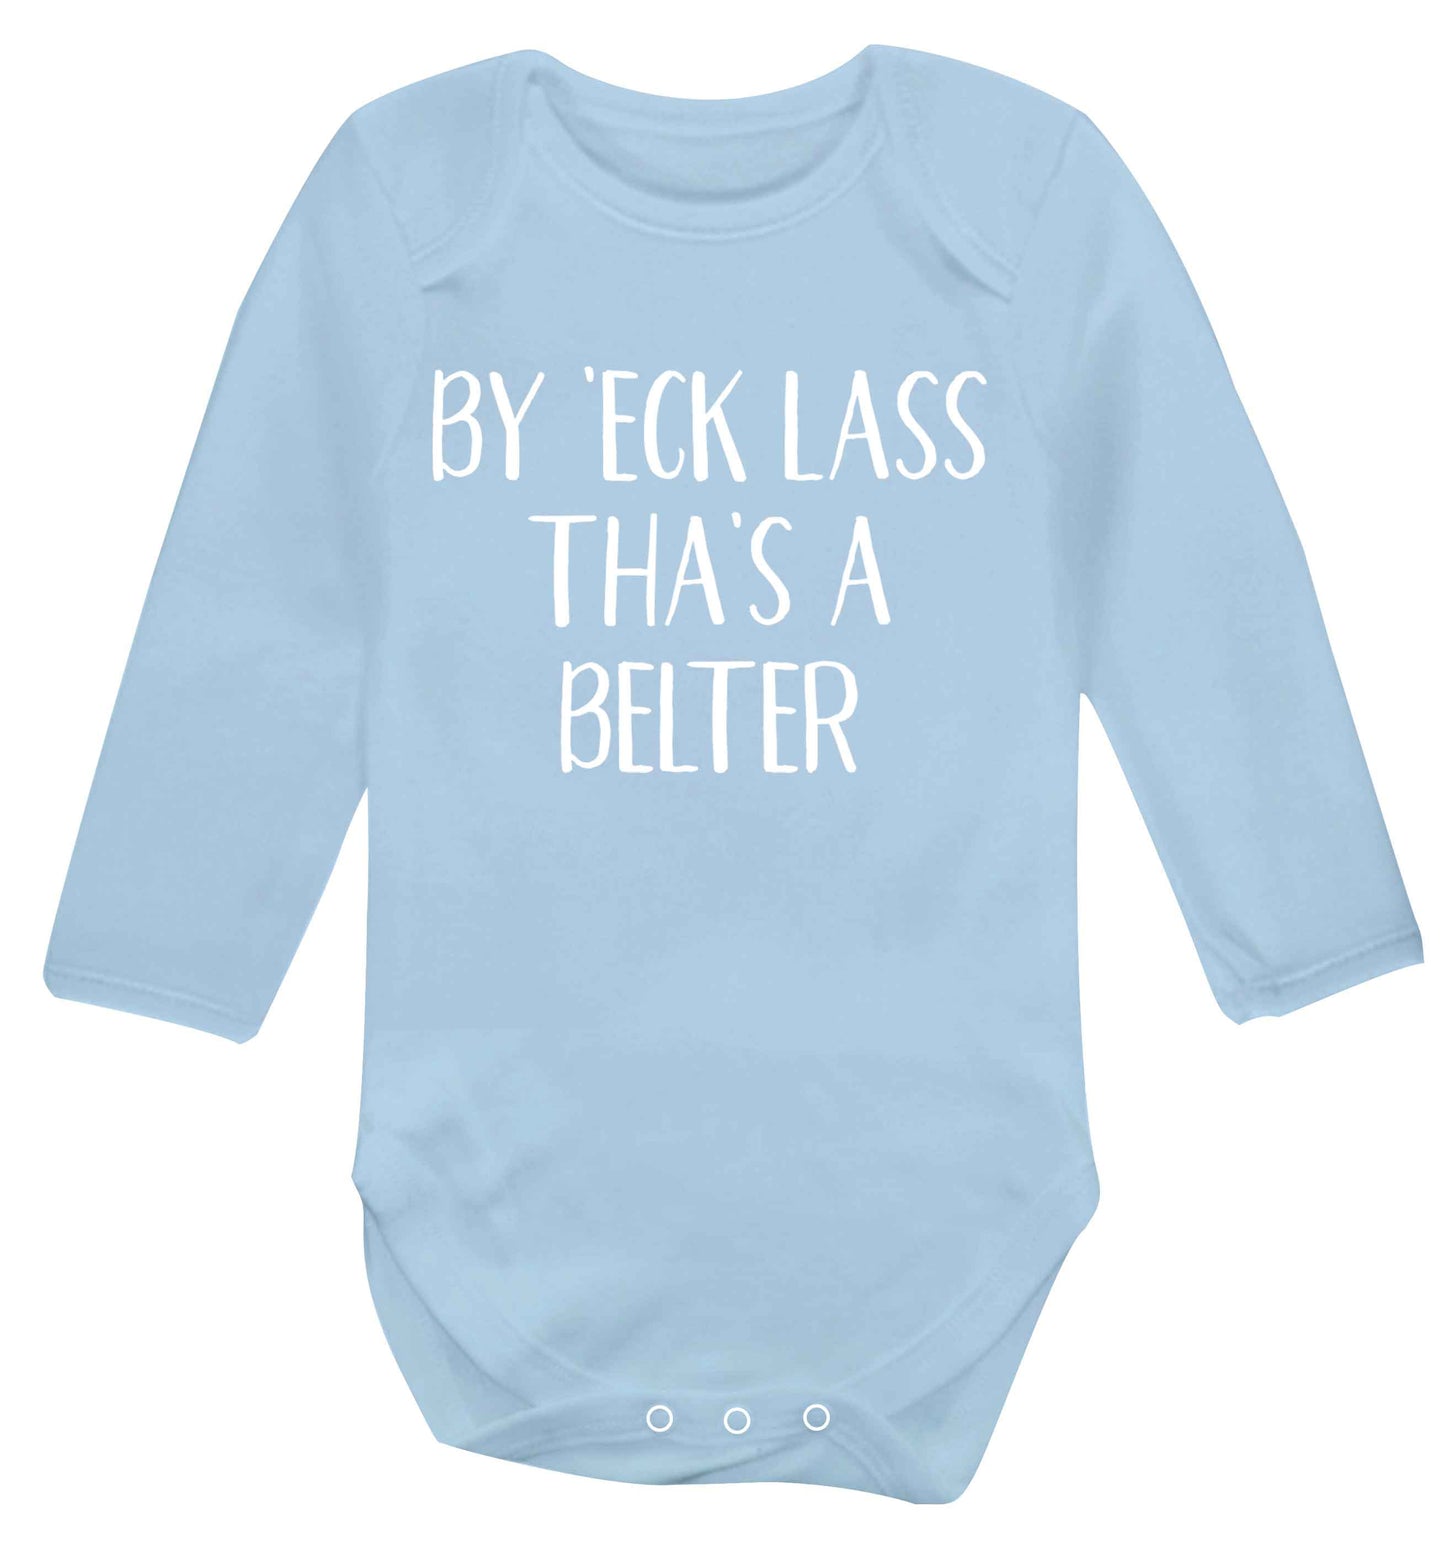 Be 'eck lass tha's a belter Baby Vest long sleeved pale blue 6-12 months